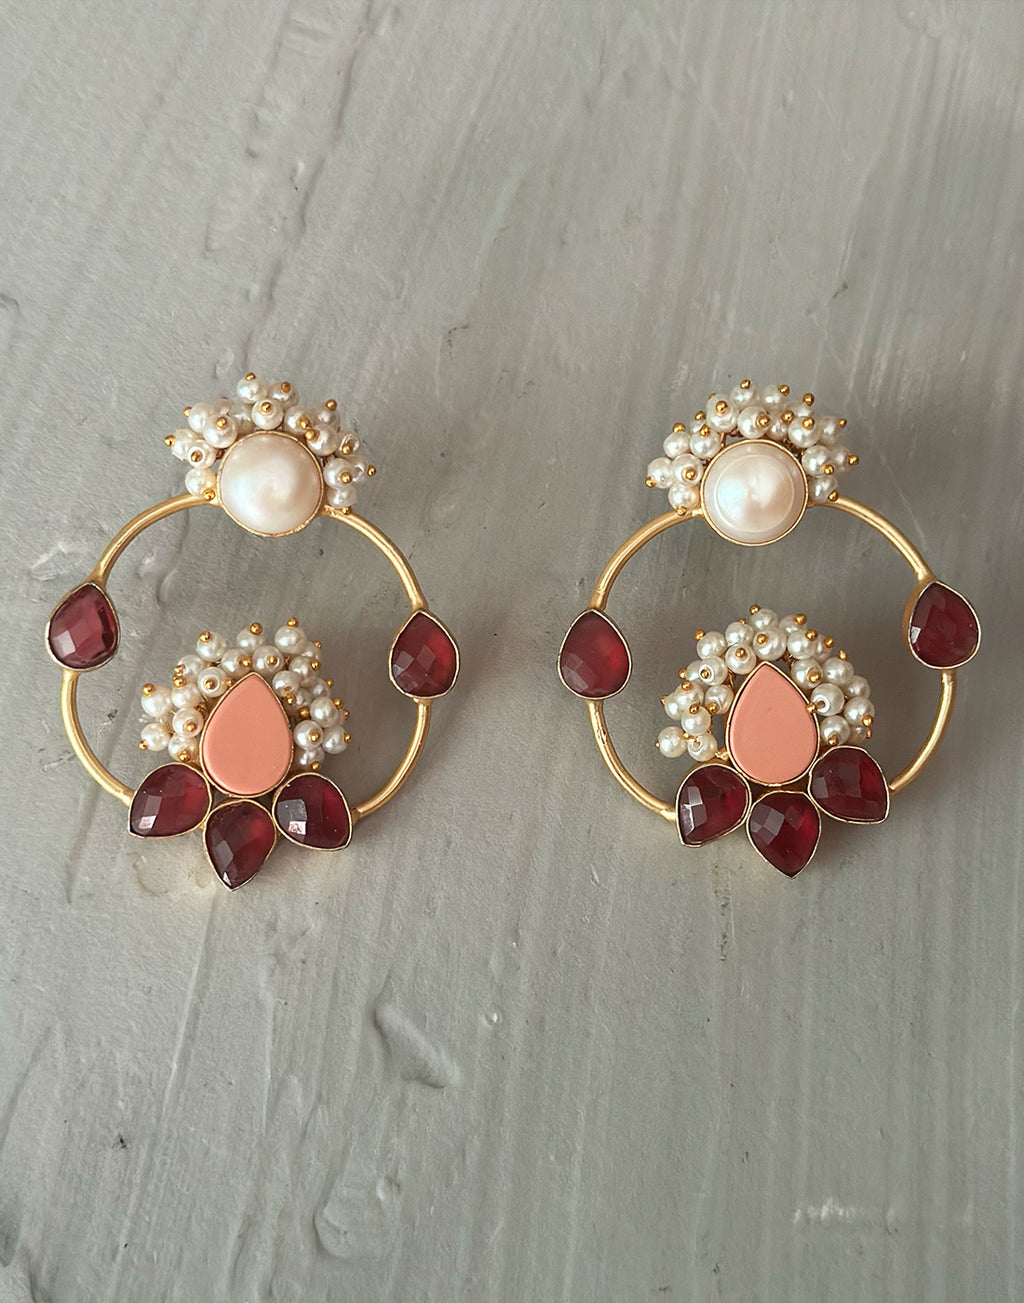 Red Floral Monalisa Hoops - Statement Earrings - Gold-Plated & Hypoallergenic Jewellery - Made in India - Dubai Jewellery - Dori